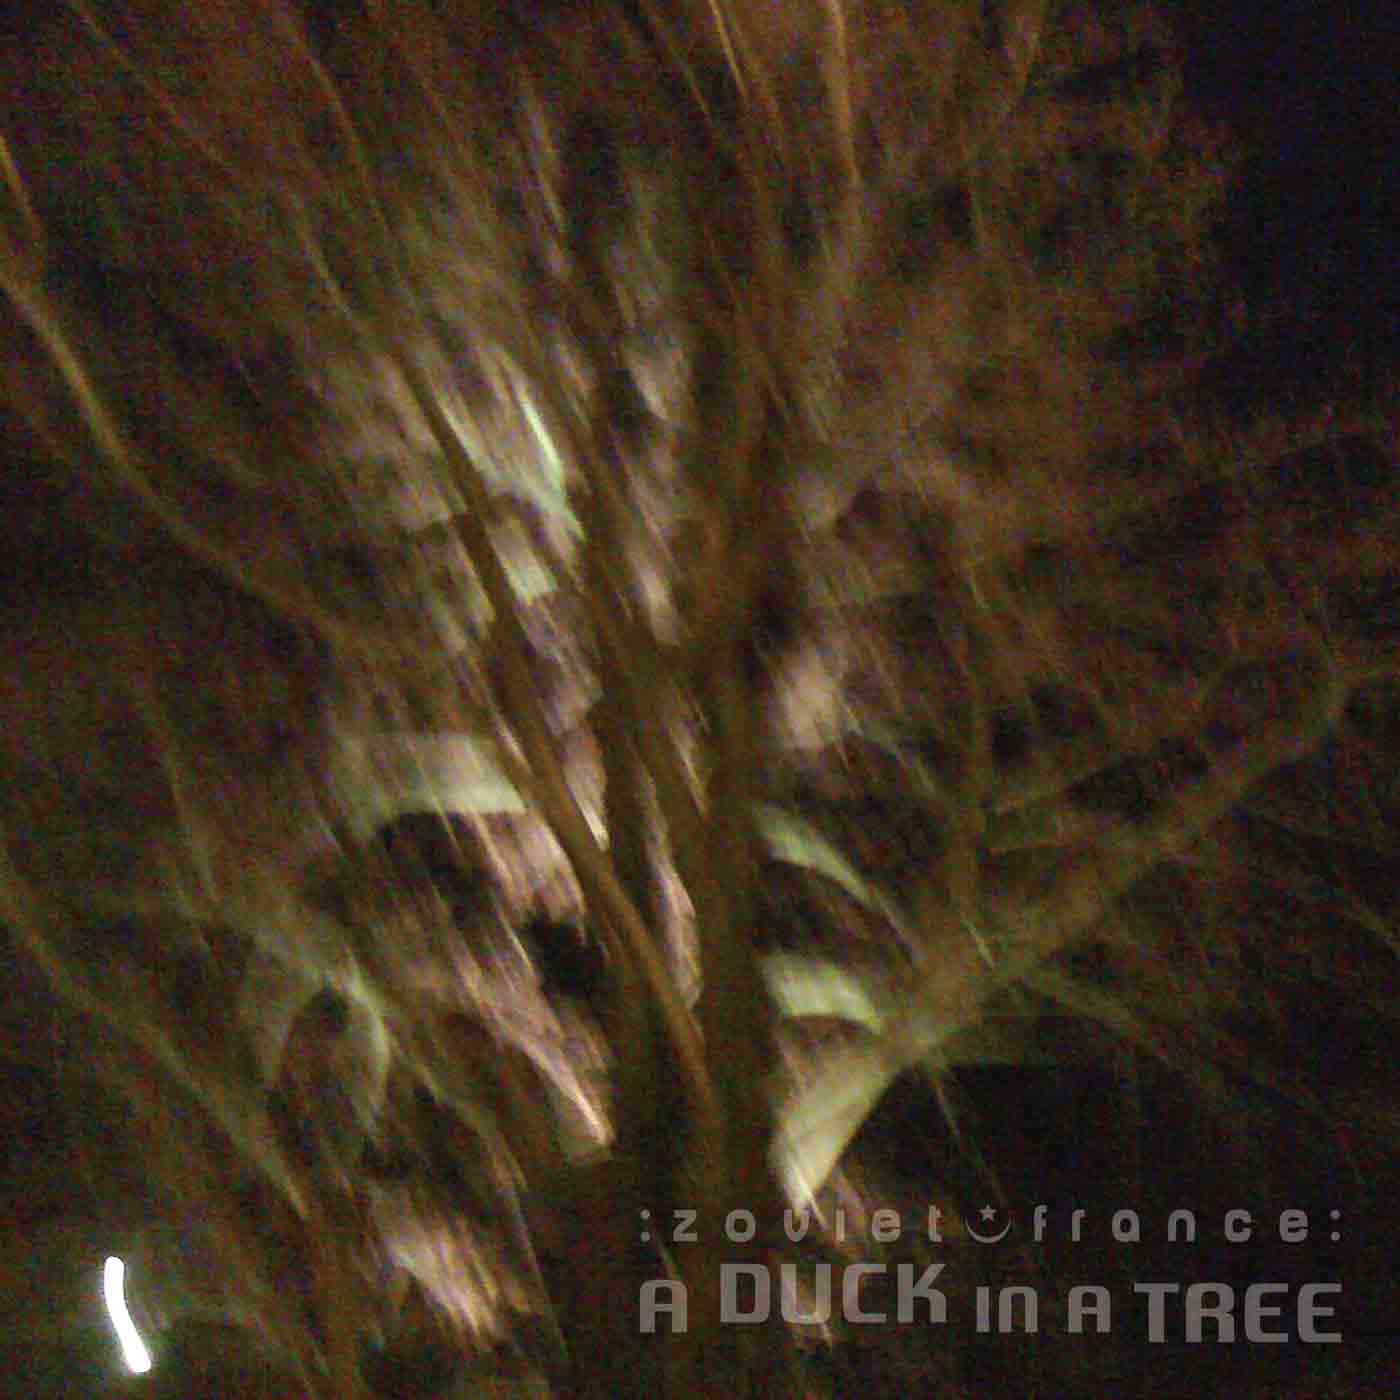 A Duck in a Tree 2014-09-06 | A Mirror Made of Wood